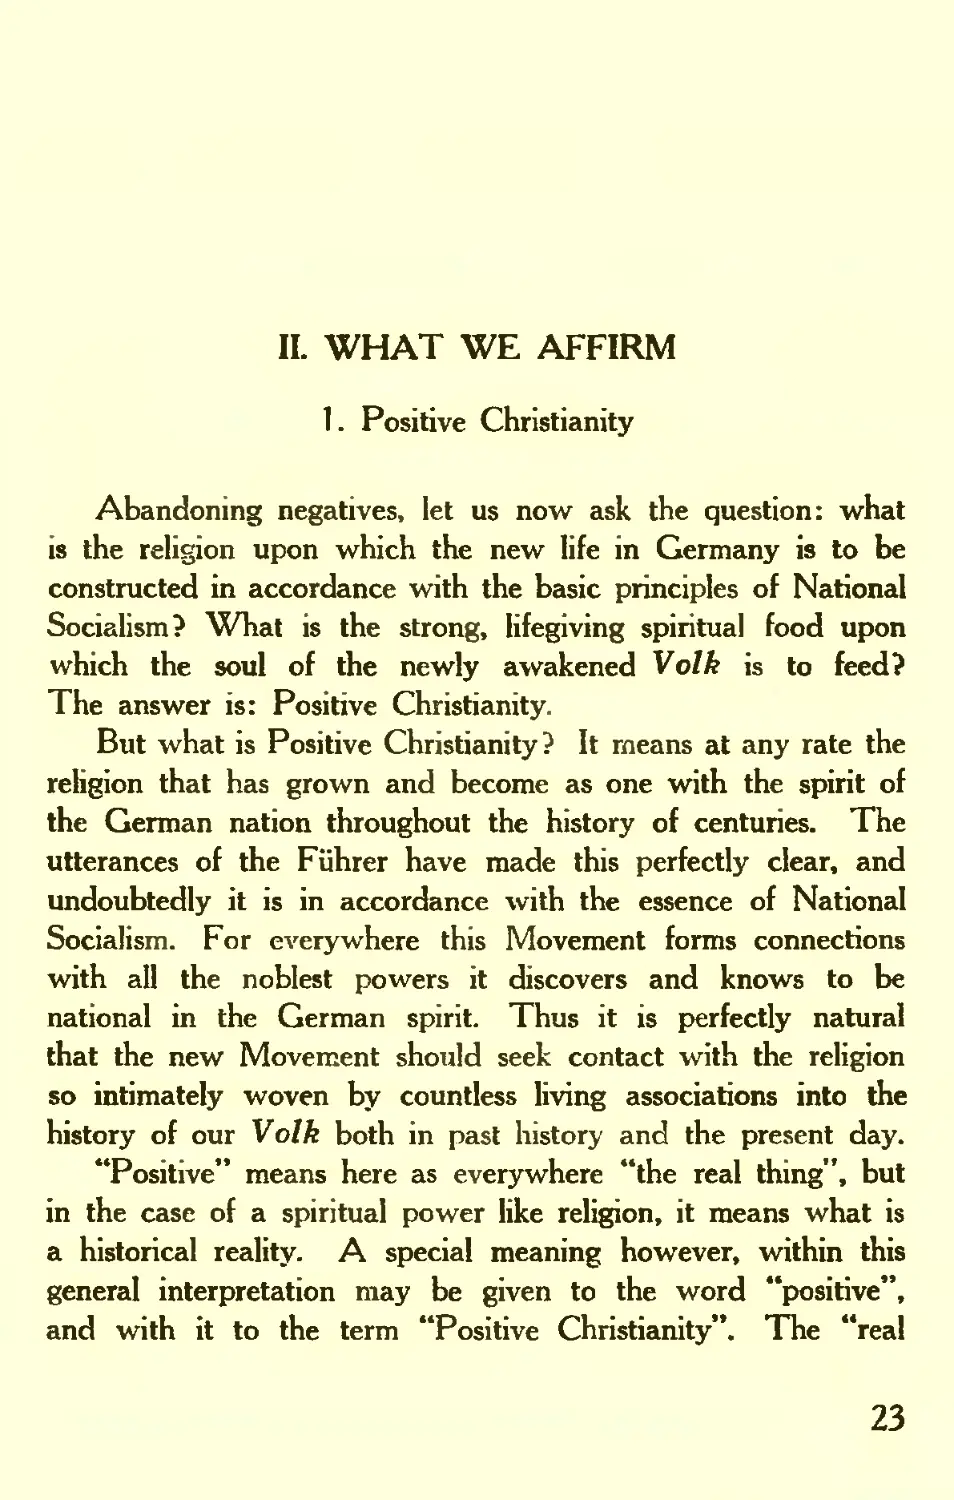 II. WHAT WE AFFIRM
1. Positive Christianity